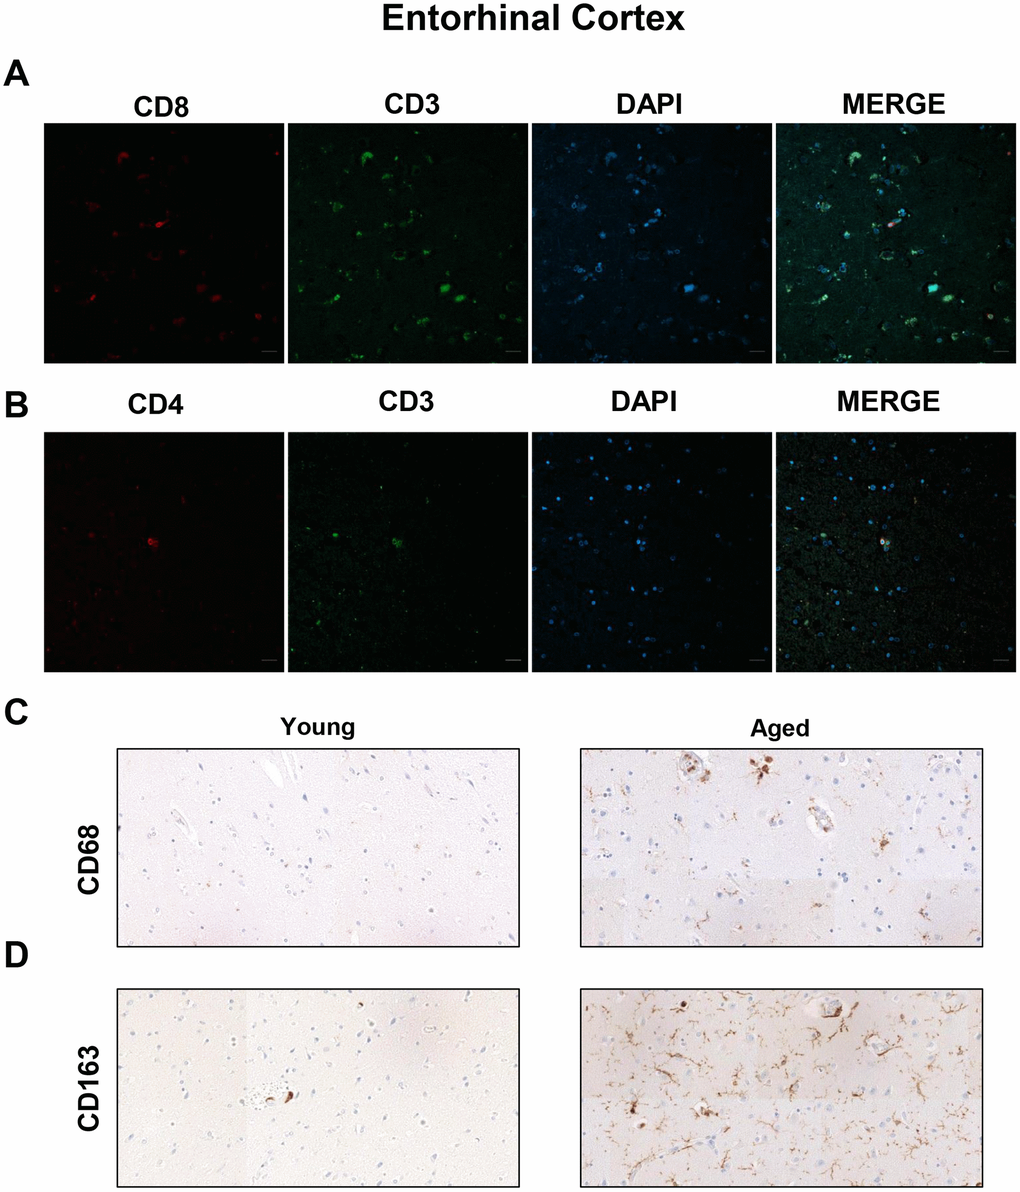 Presence of cytotoxic CD8+ T cells in the entorhinal cortex of aged individuals. (A) Co-immunofluorescence of CD8 with CD3 marker (n=4). (B) Co-immunofluorescence of CD3 with CD4 marker (n=4). Cell nuclei were counterstained with DAPI. Scale bar: 20 μm. (C, D) Representative images of CD68 and CD163 microglia markers in young and aged individuals (n=3). Images were obtained using the 20× objective.